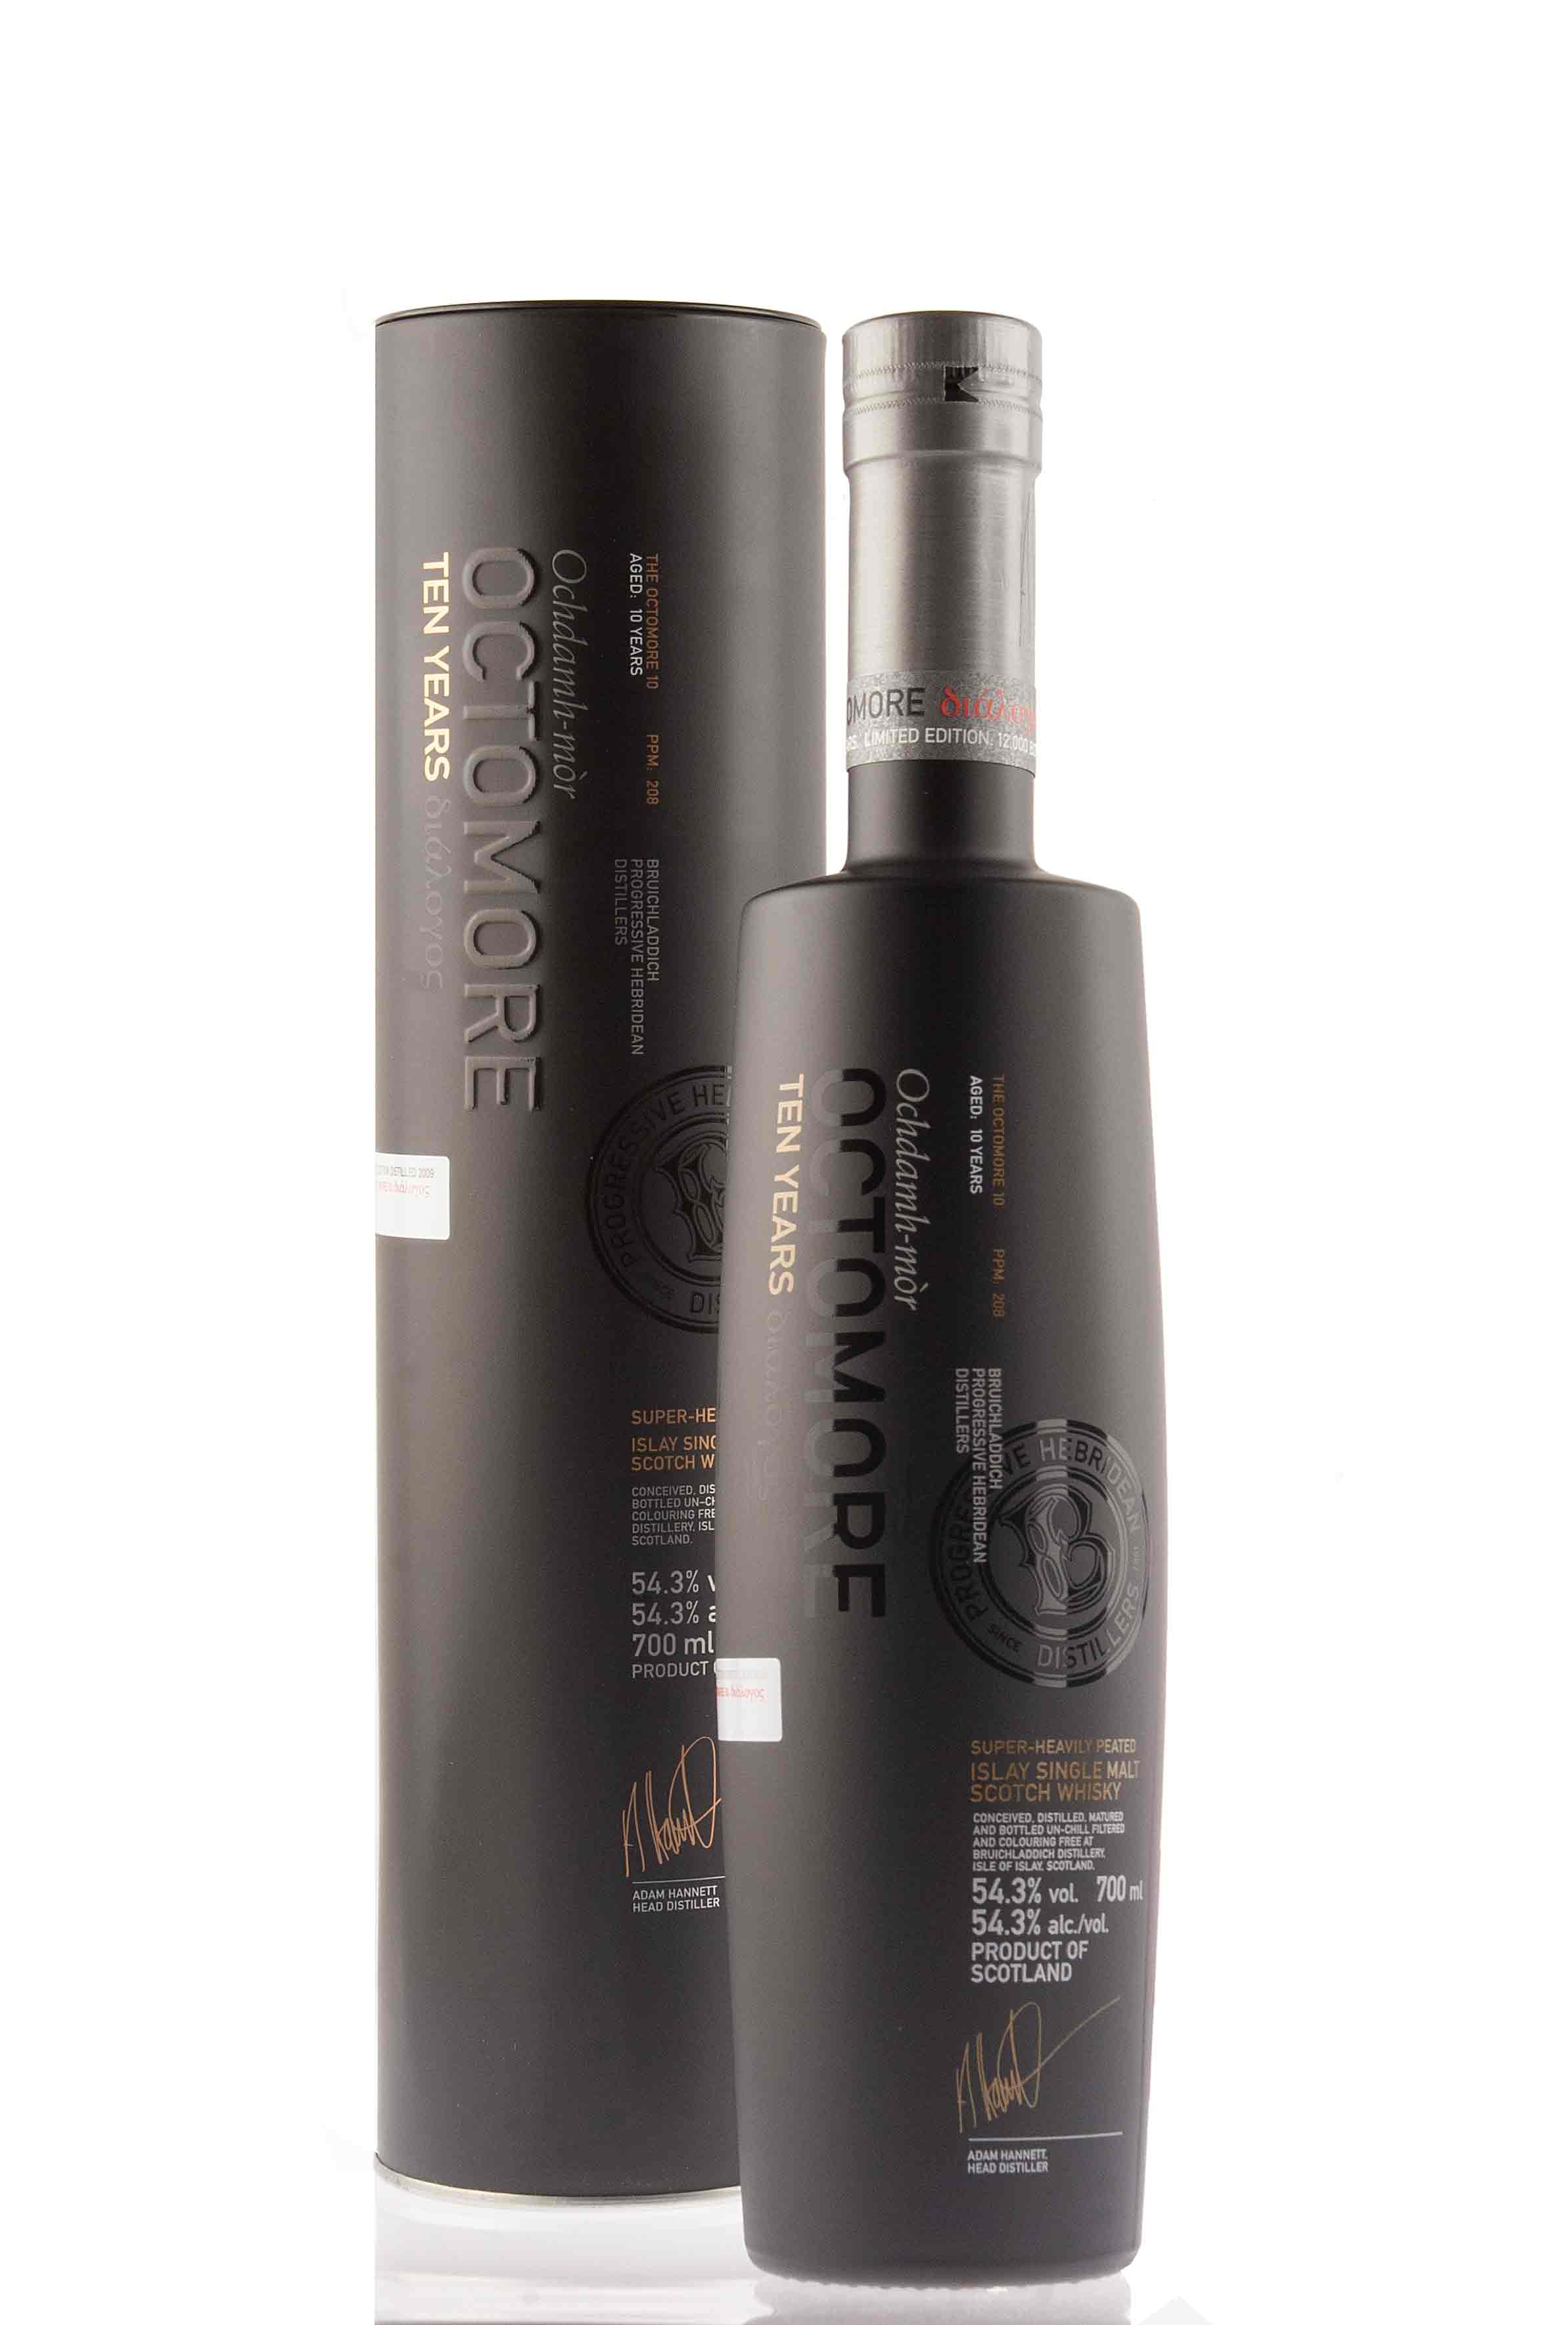 Octomore 10 Year Old - 2009 | Fourth Edition